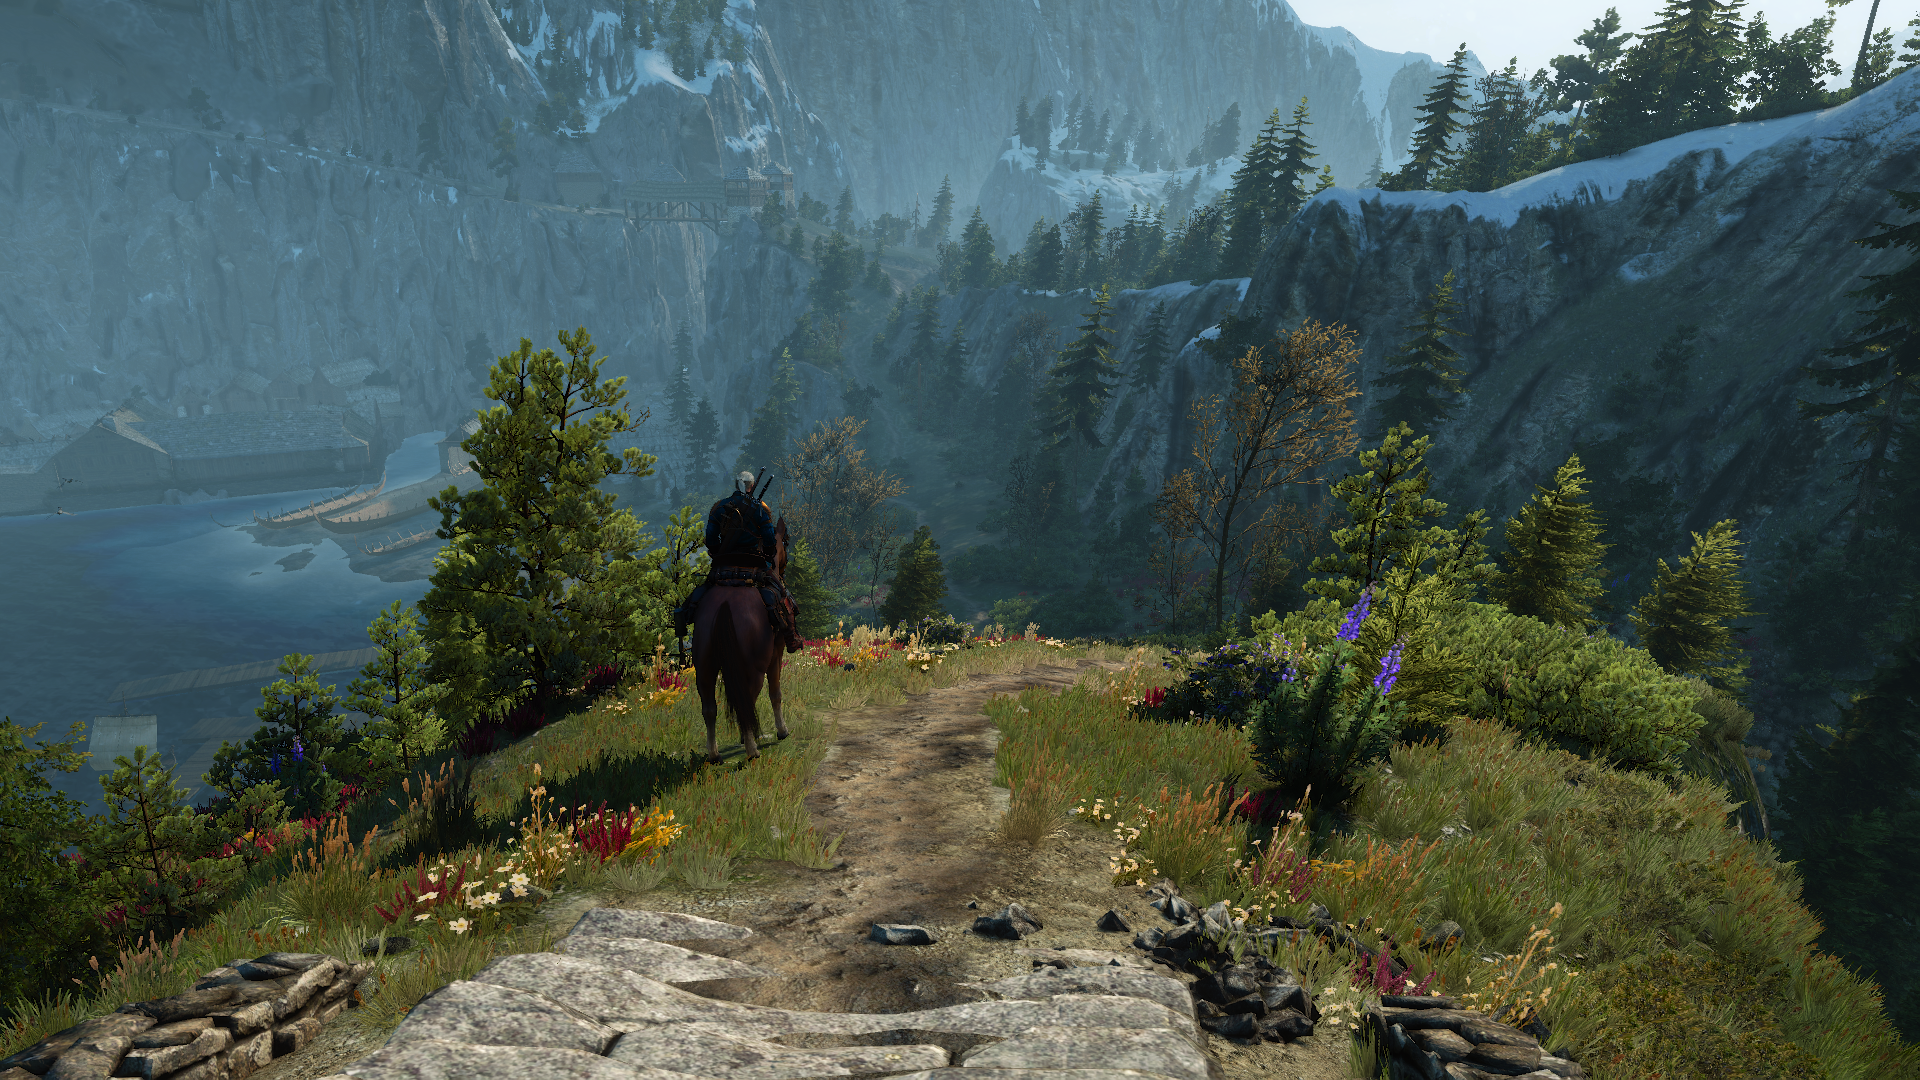 General 1920x1080 The Witcher video games The Witcher 3: Wild Hunt video game landscape RPG screen shot PC gaming